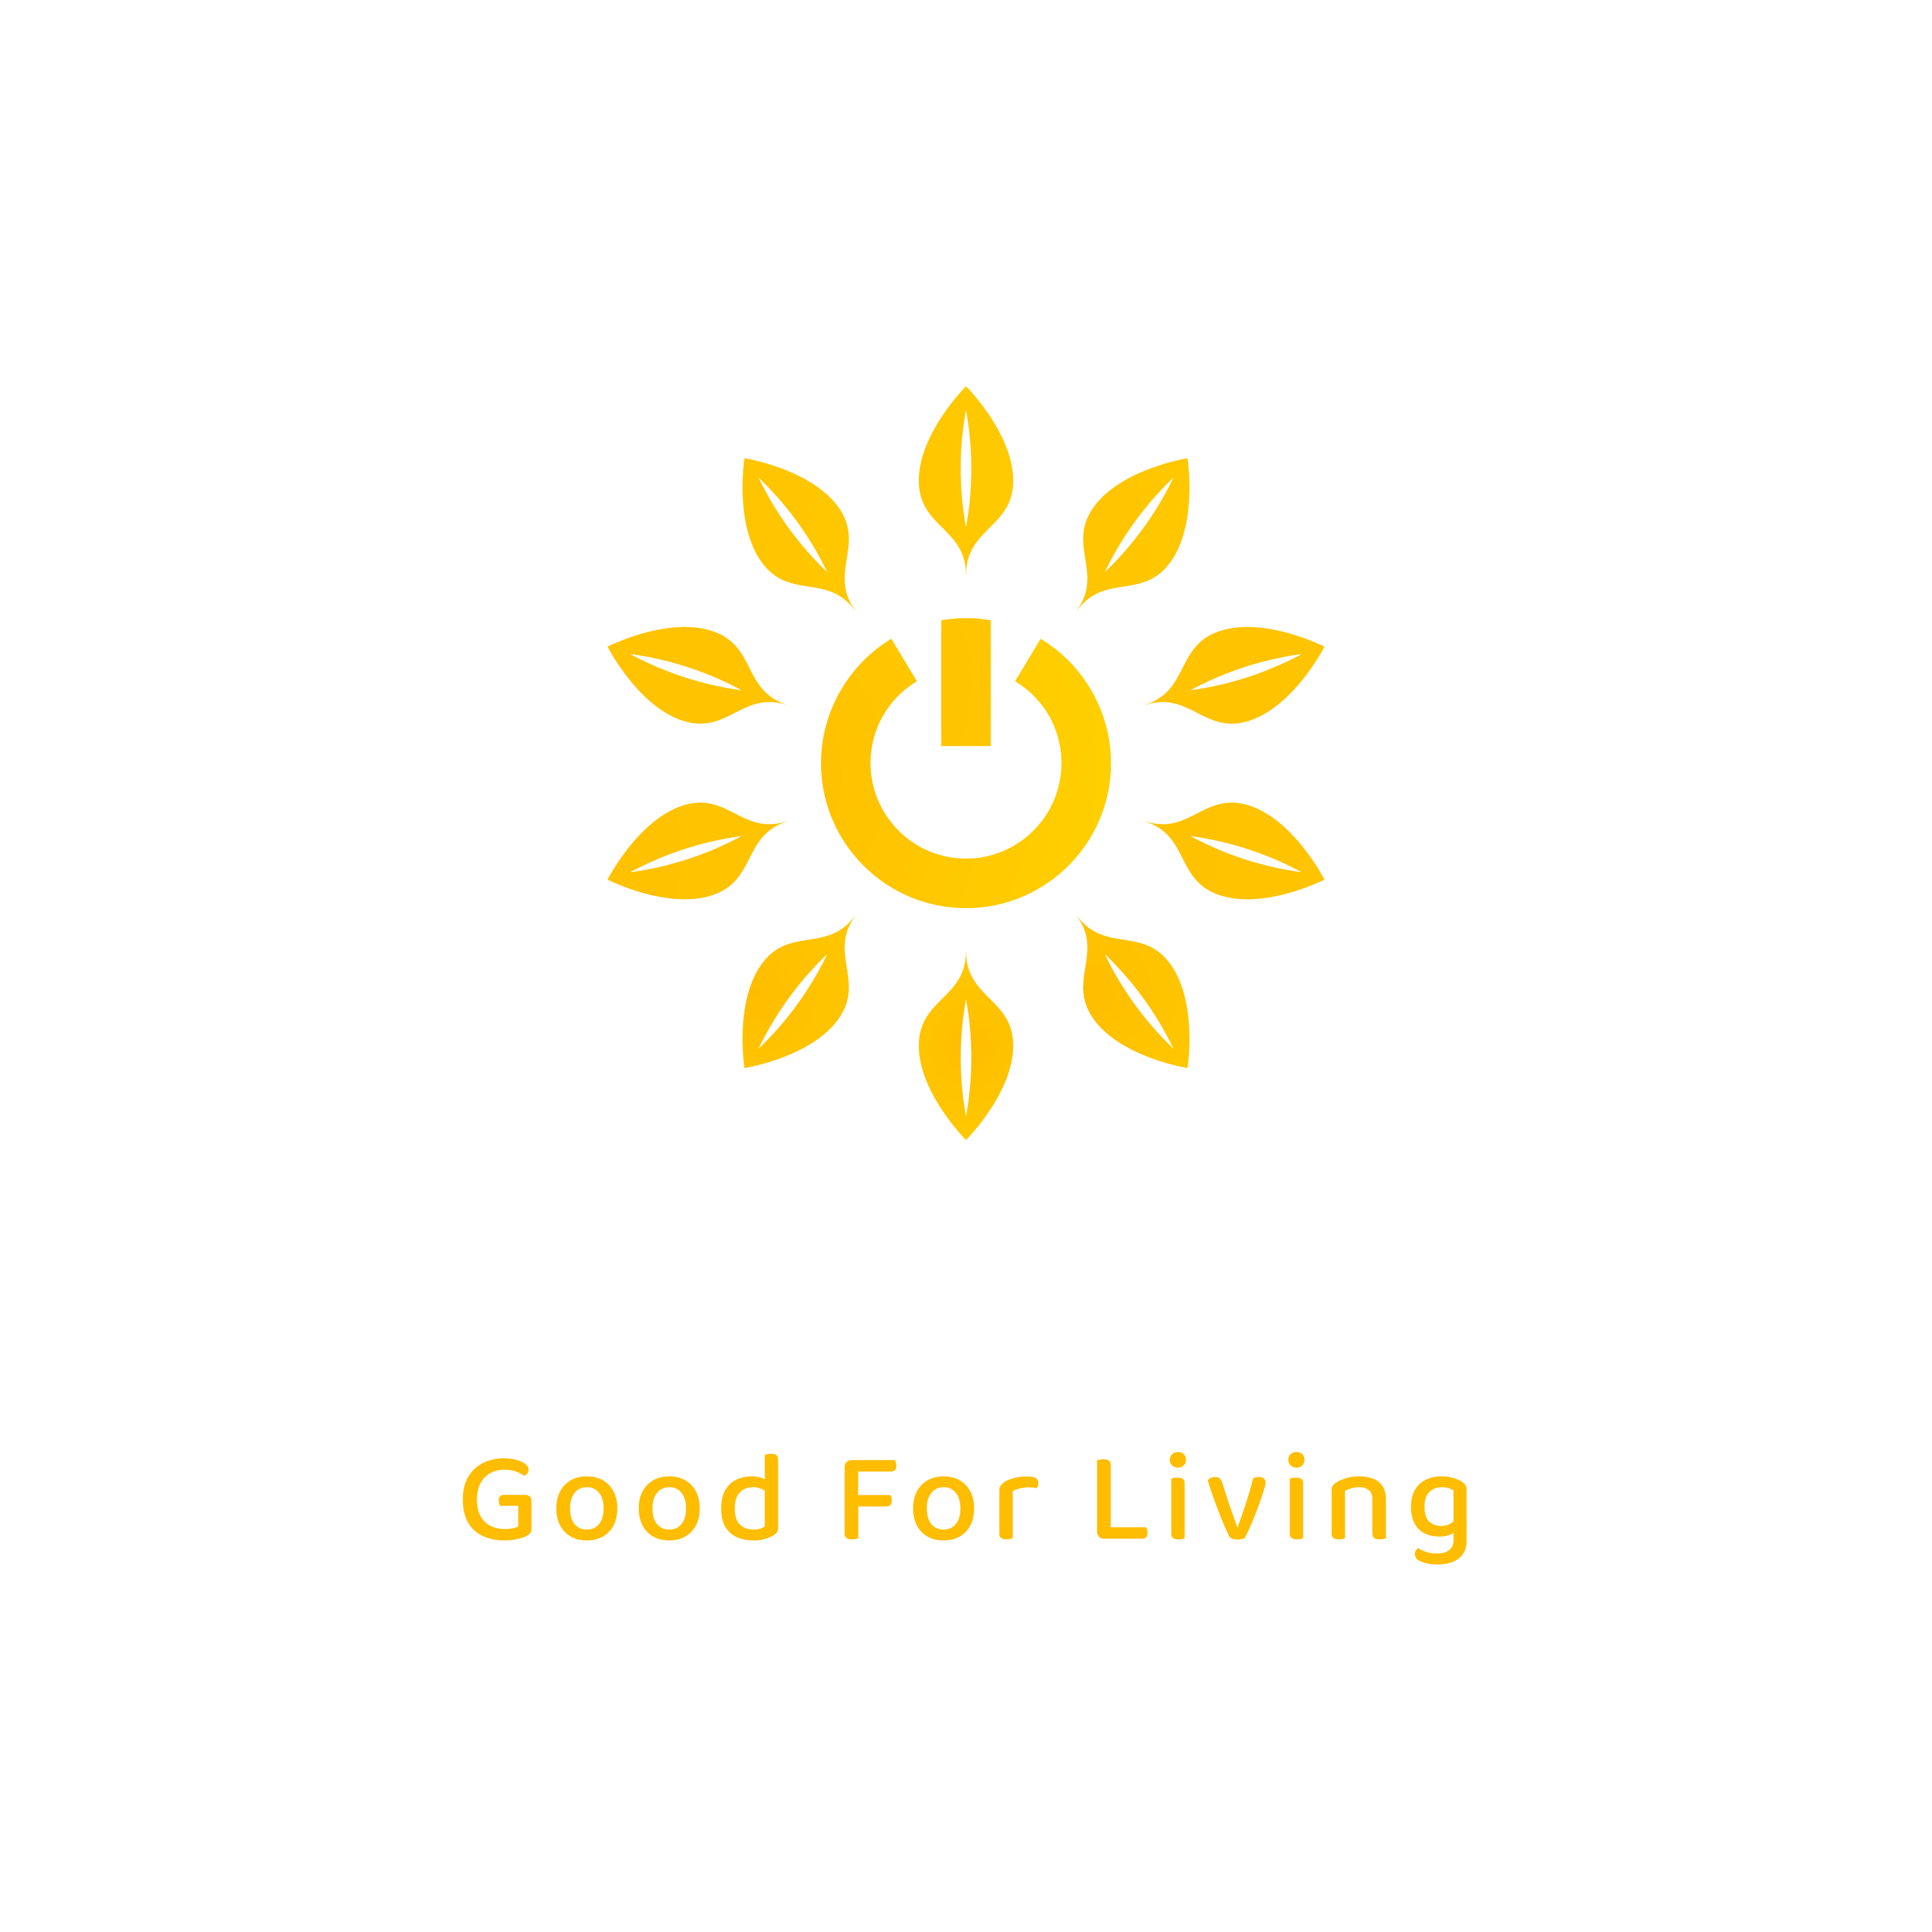 GFL Solar Logo - a power button sprouting leaves above the text